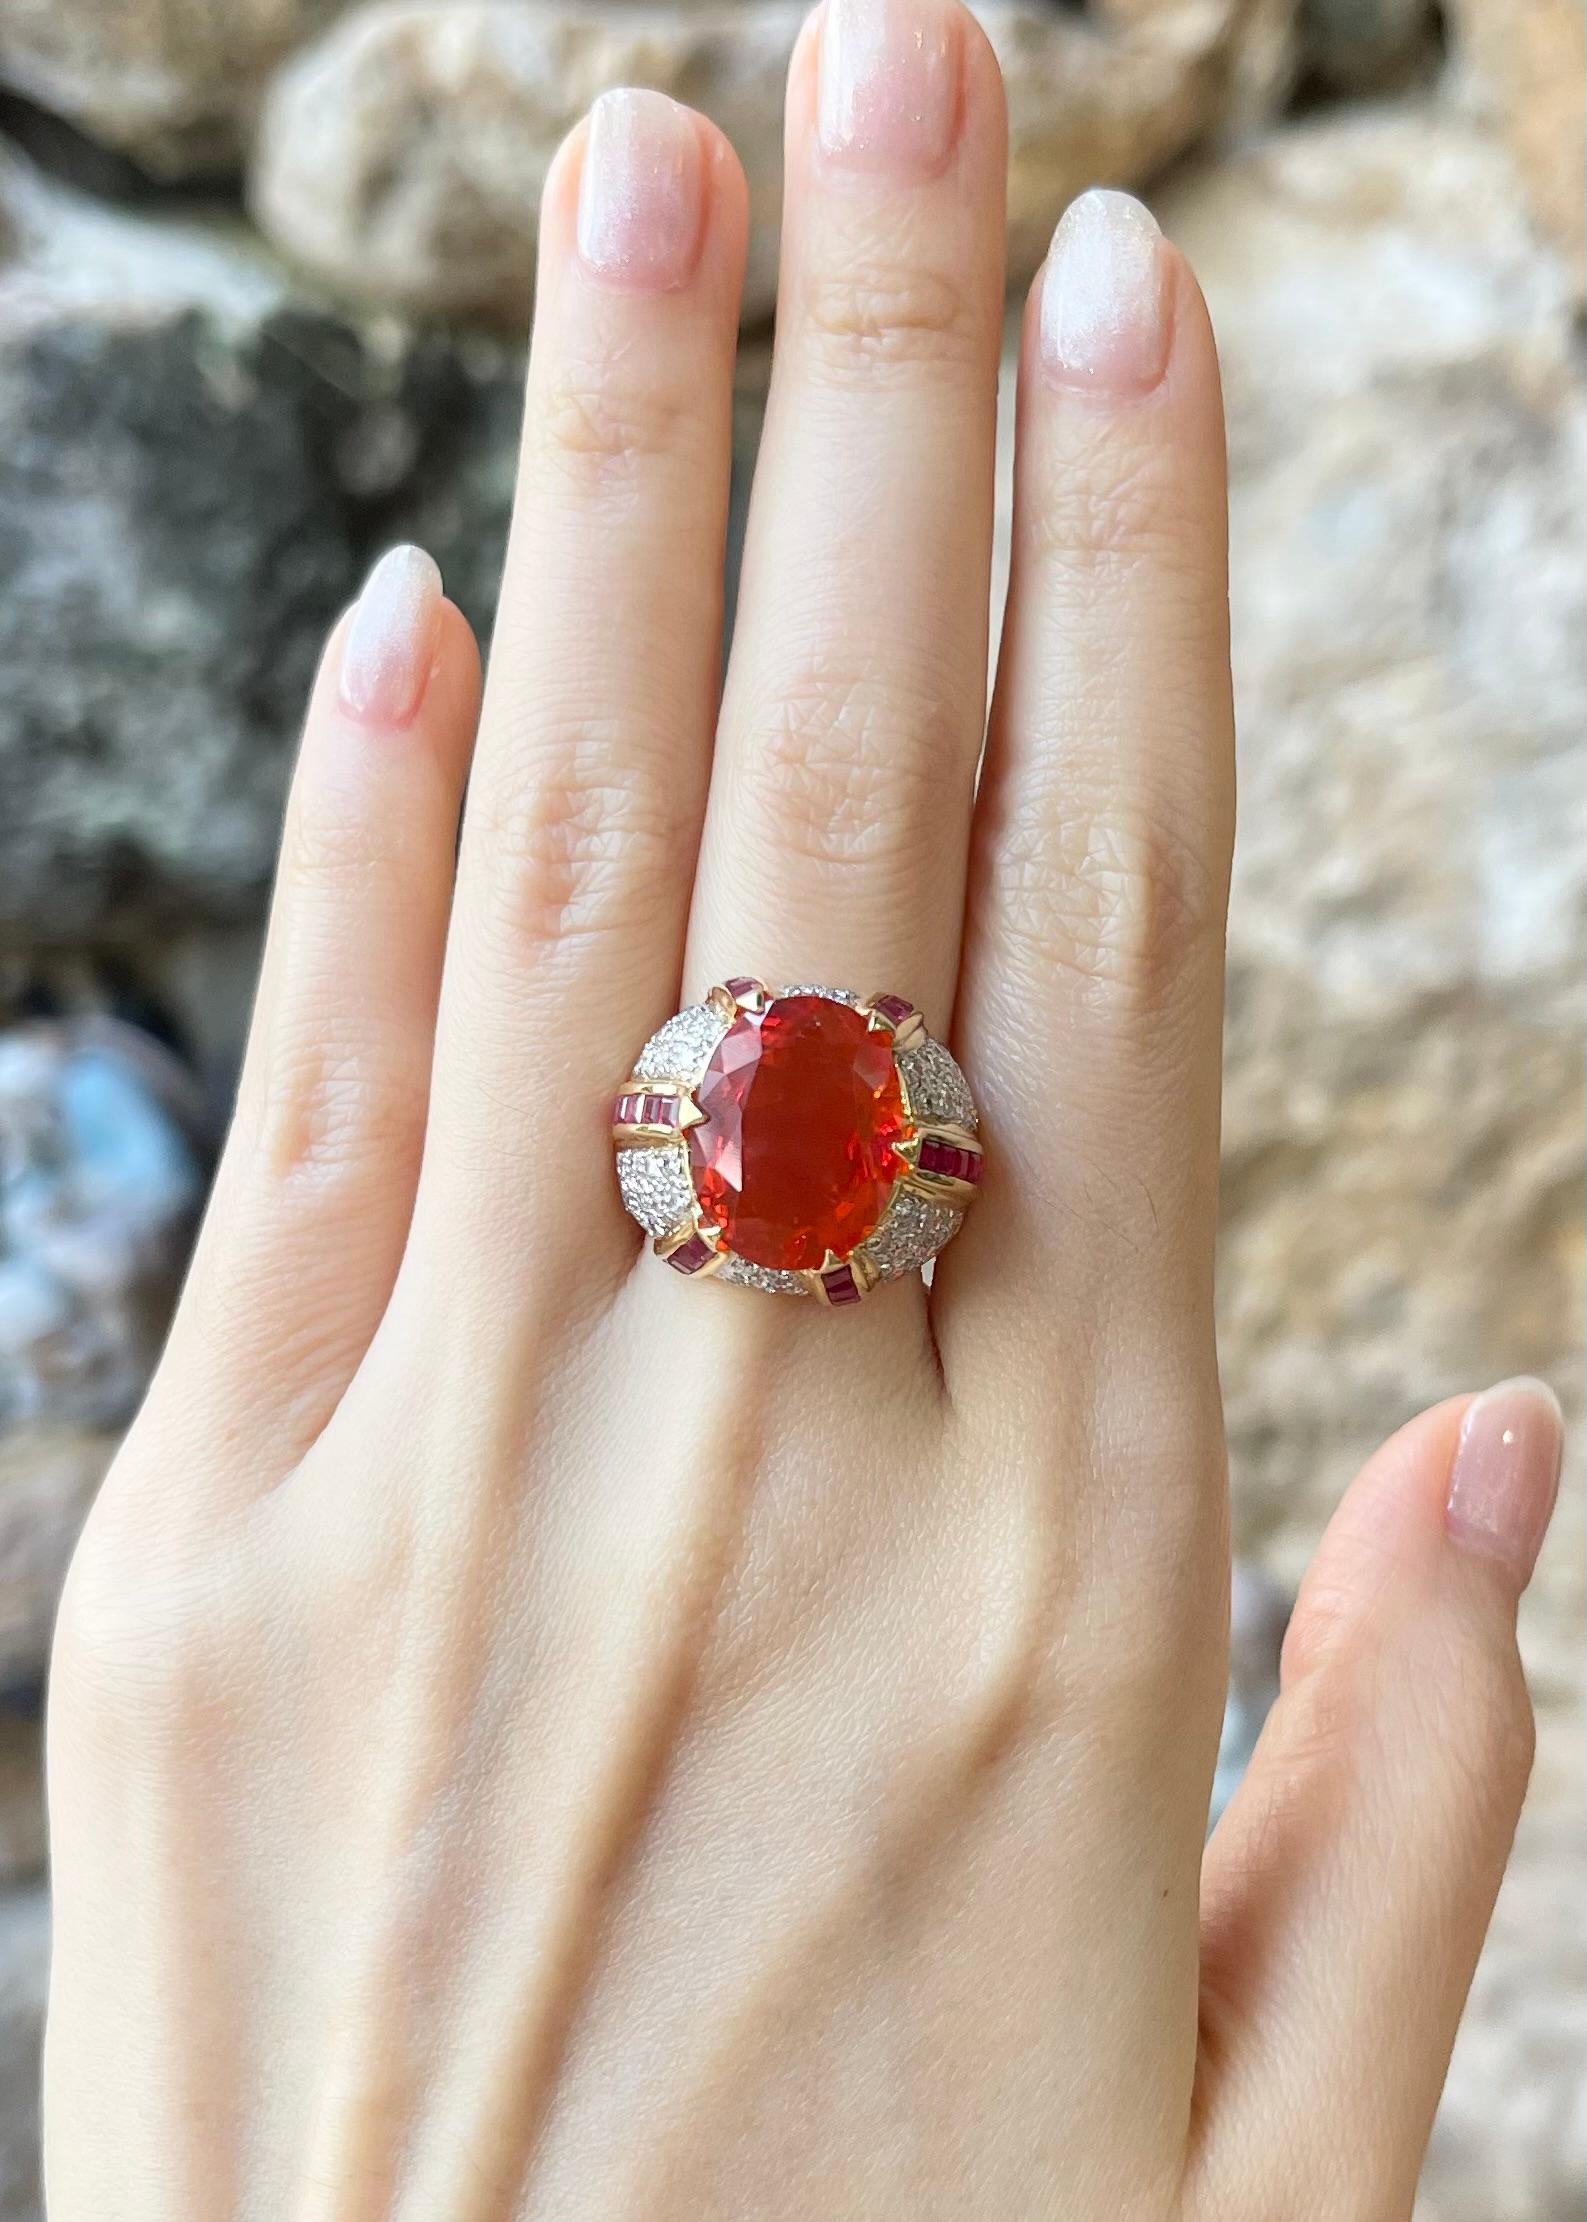 Fire Opal 7.44 carats, Ruby 1.0 carat and Diamond 0.75 carat Ring set in 14K Gold Settings

Width:  1.3 cm 
Length: 1.6 cm
Ring Size: 53
Total Weight: 18.56 grams

